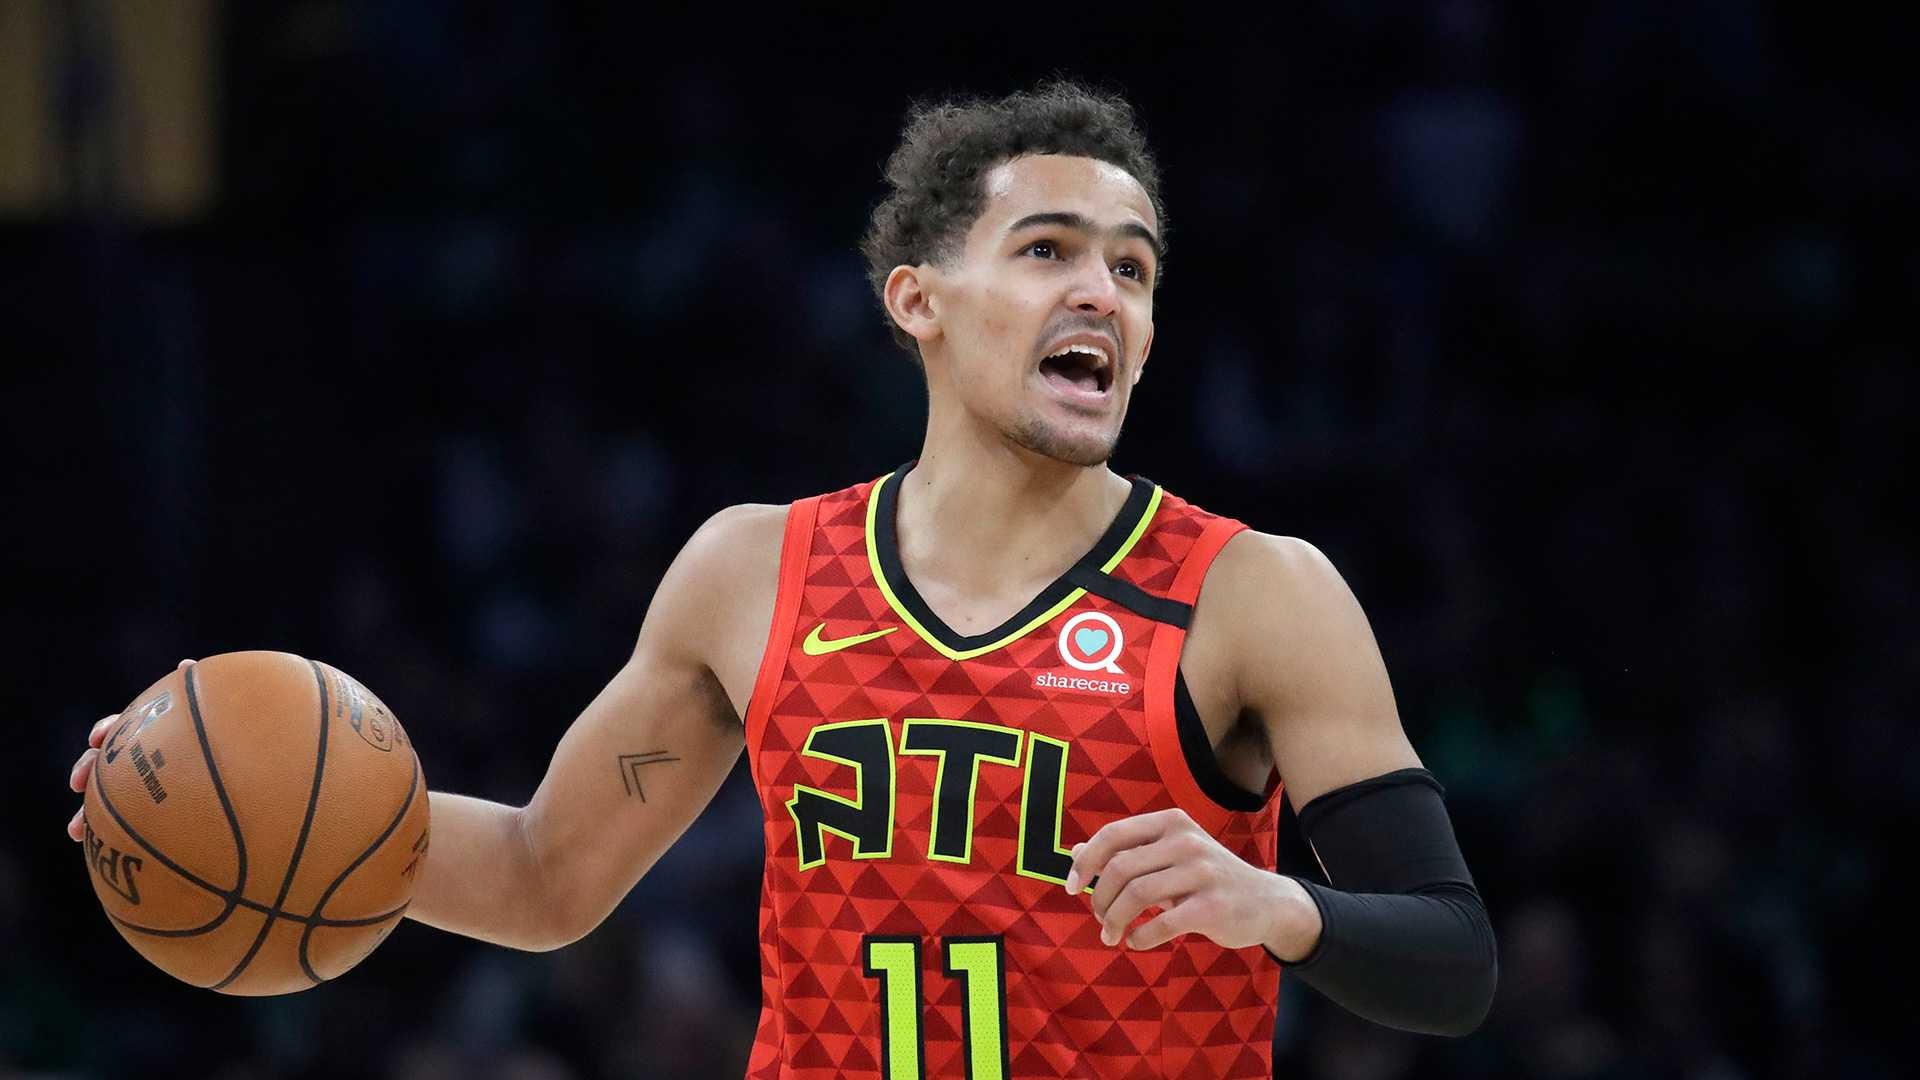 Trae Young, HD wallpapers, High-quality images, Striking backgrounds, 1920x1080 Full HD Desktop